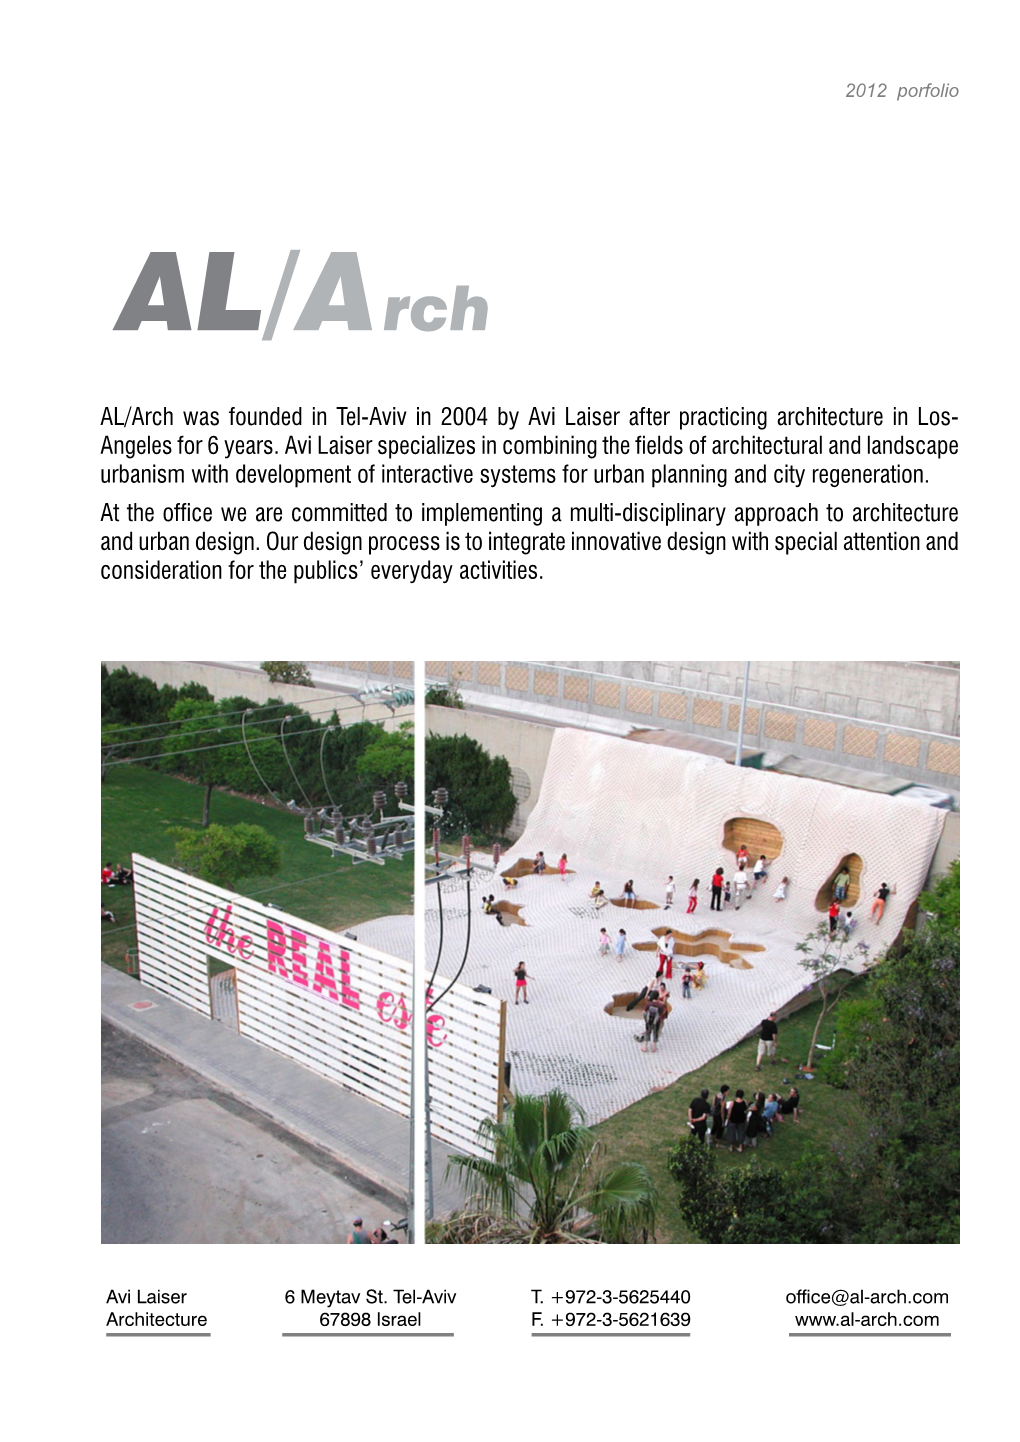 AL/Arch Was Founded in Tel-Aviv in 2004 by Avi Laiser After Practicing Architecture in Los- Angeles for 6 Years